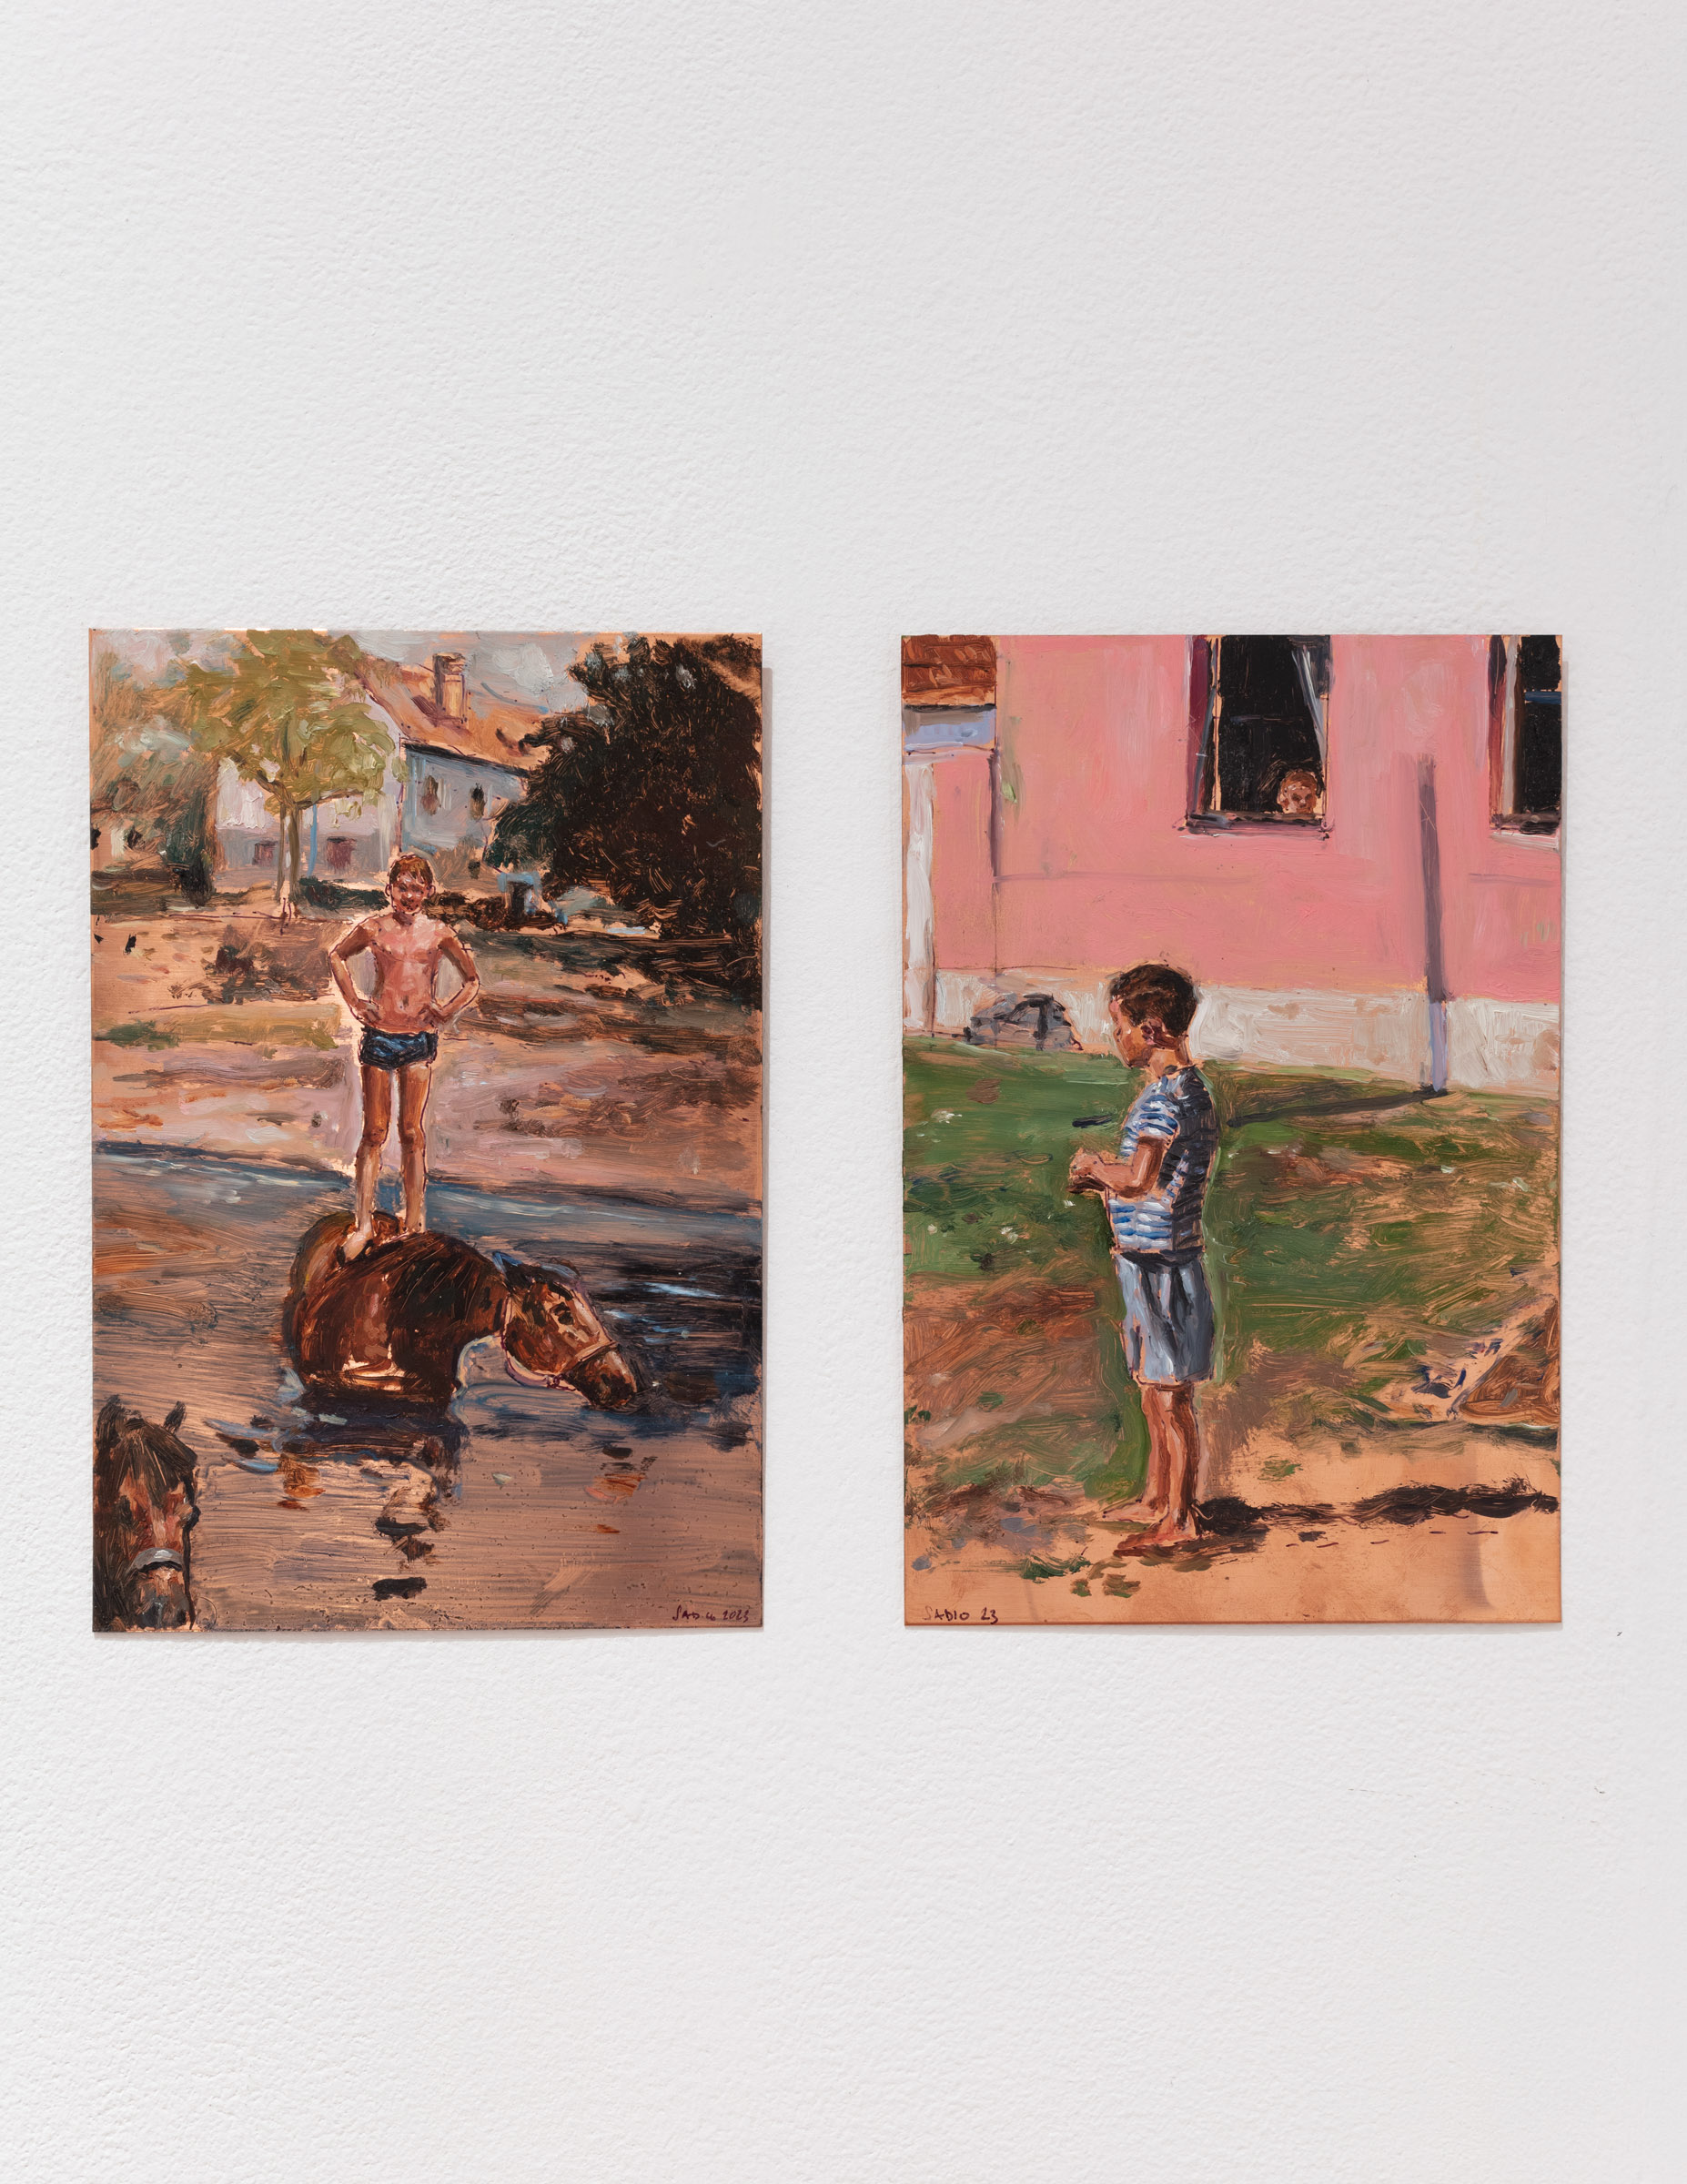 Boy Standing on the Horse, Pink House